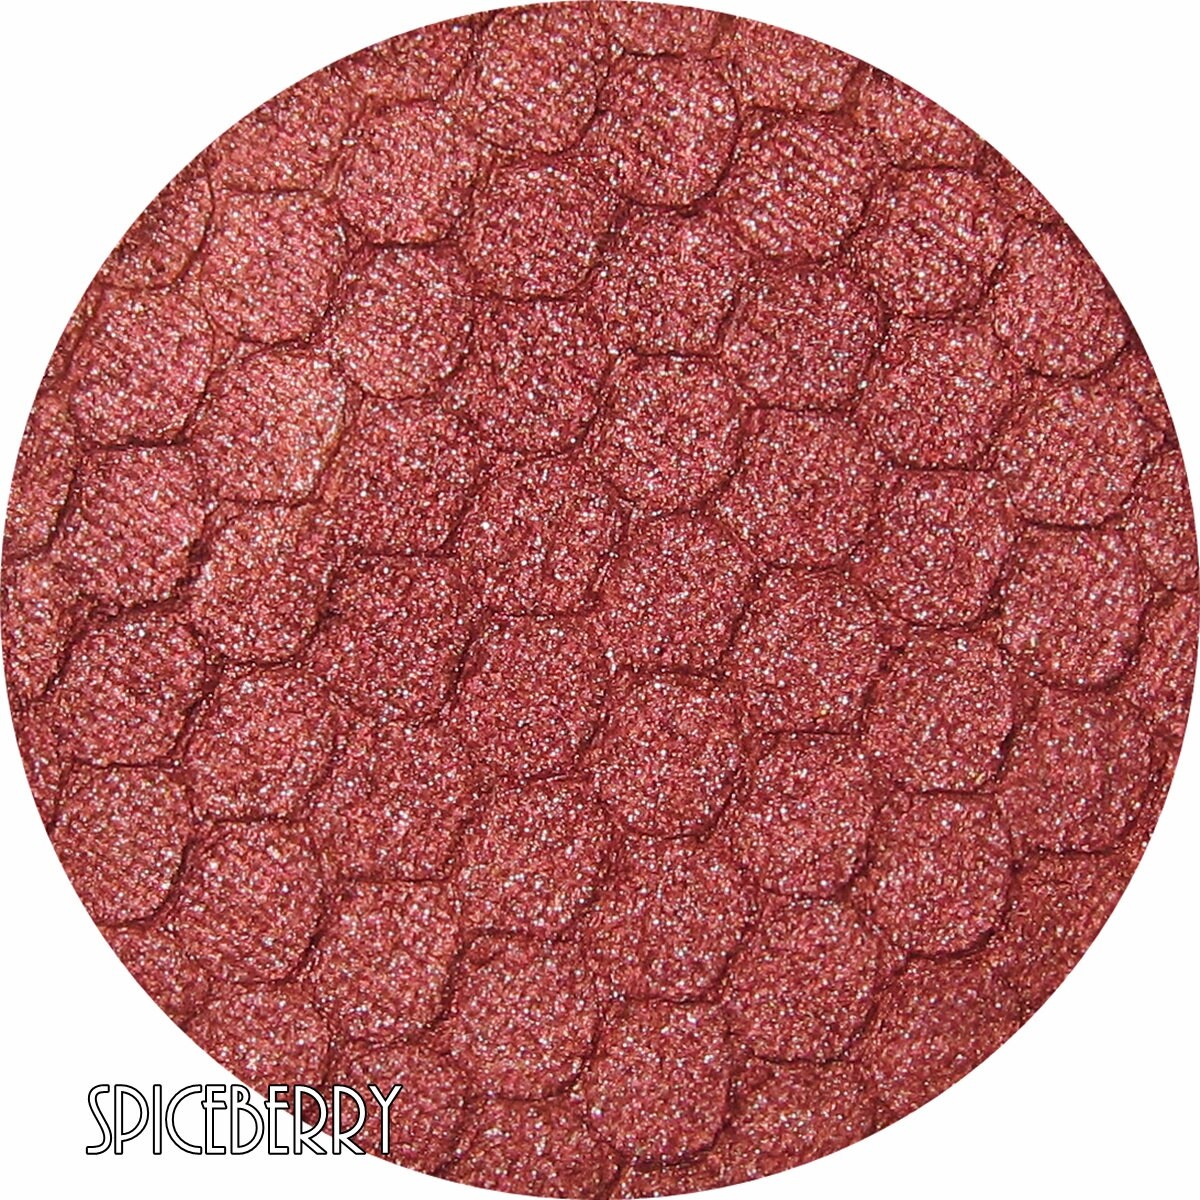 Coppery Red Pressed Mineral Eyeshadow-Spiceberry